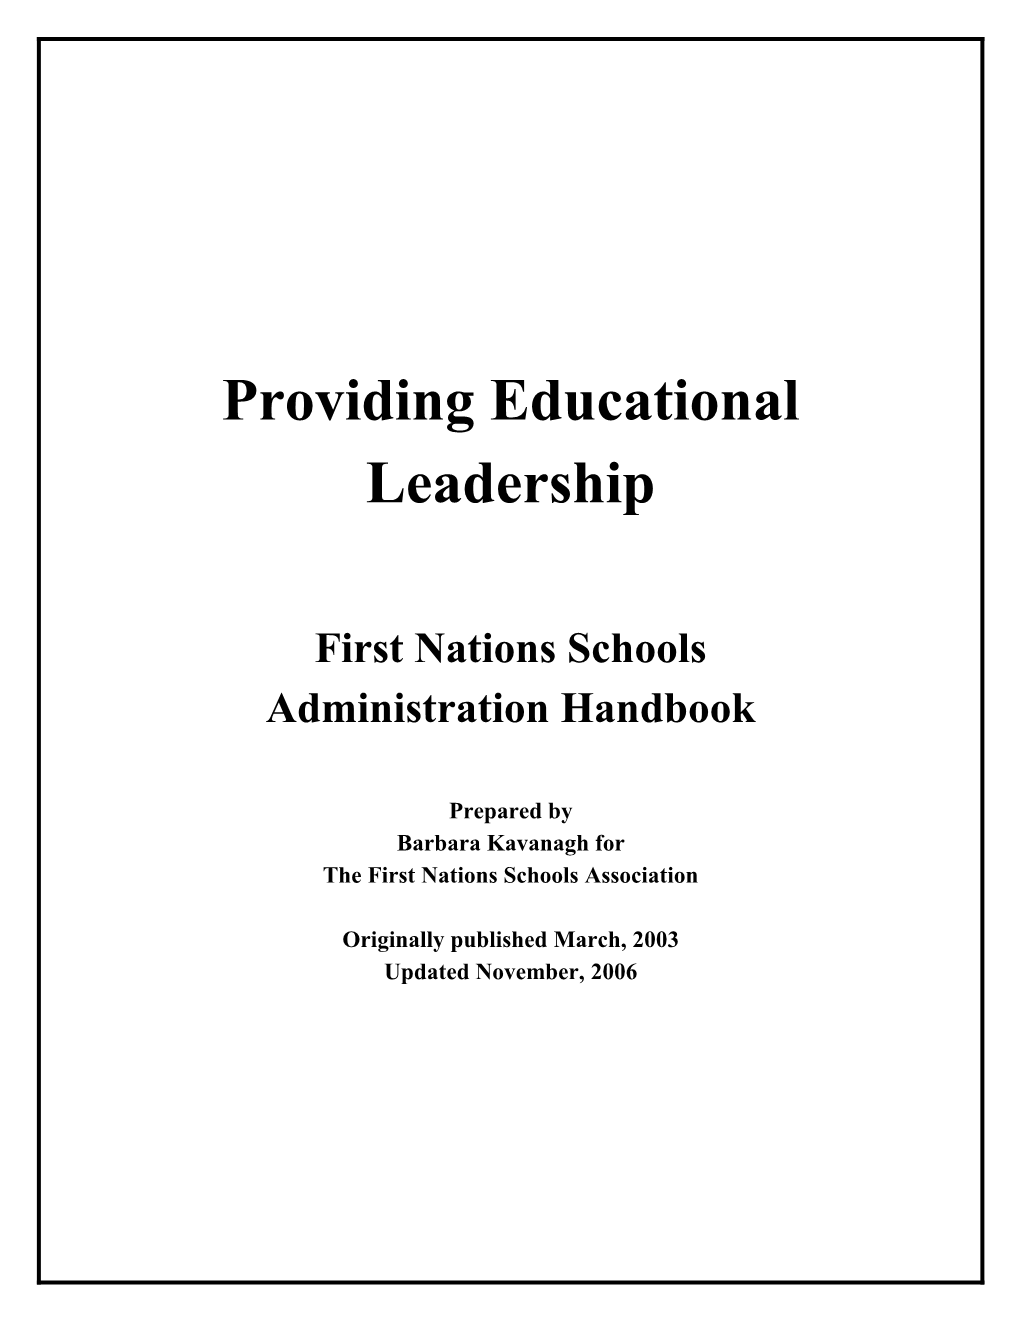 First Nations Schools